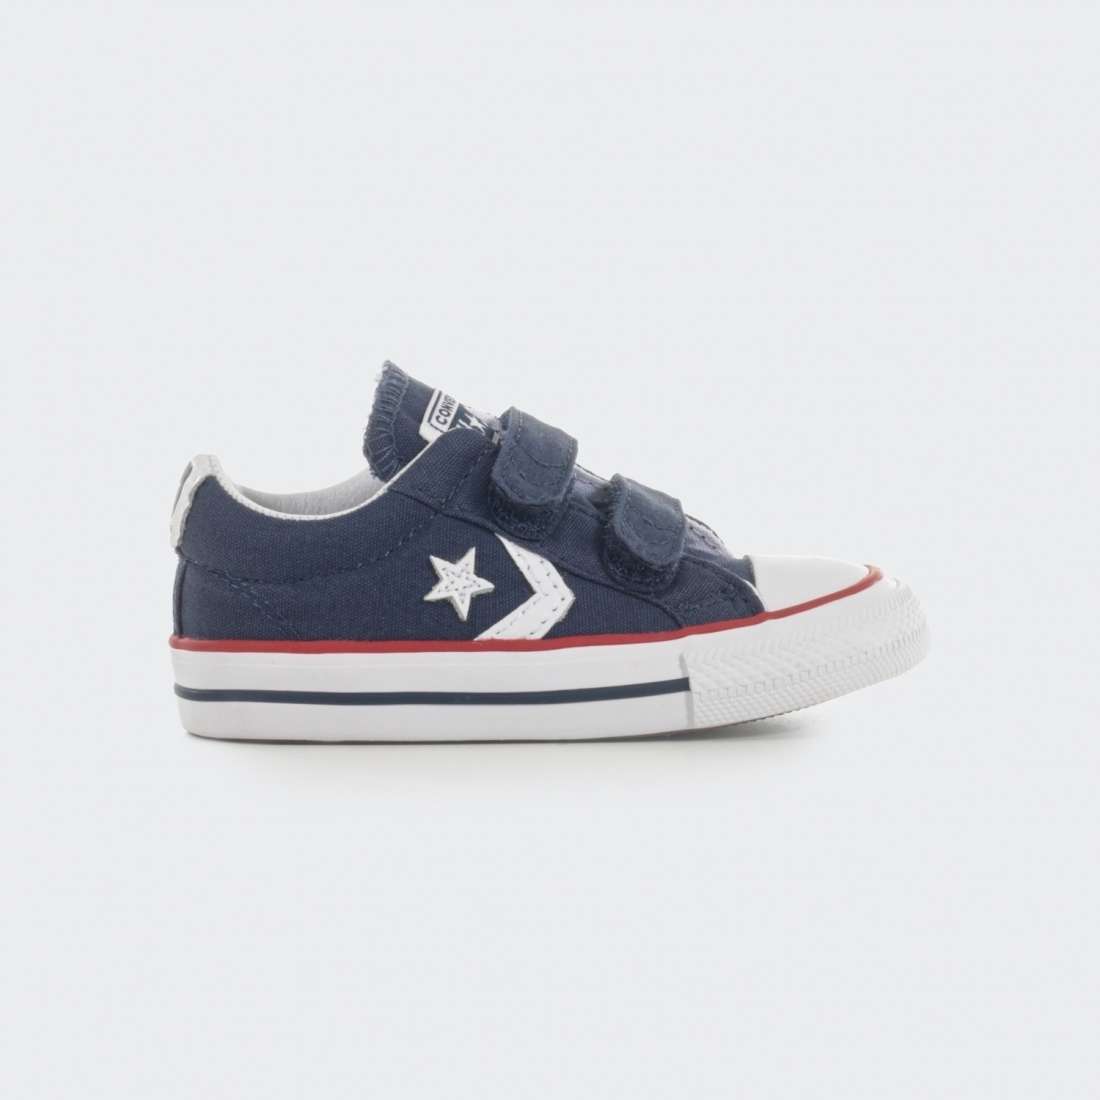 CONVERSE ALL STAR PLAYER NAVY/WHITE/RED